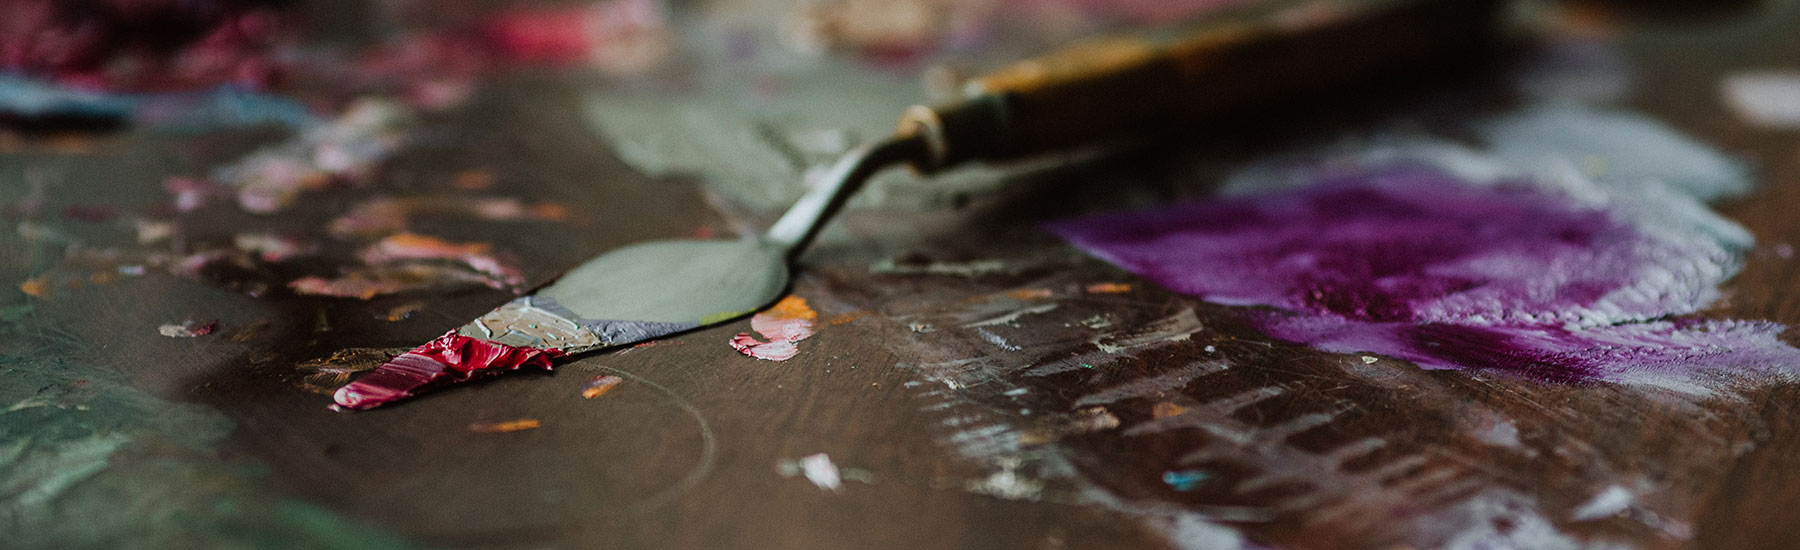 Photo of a palette knife with paint